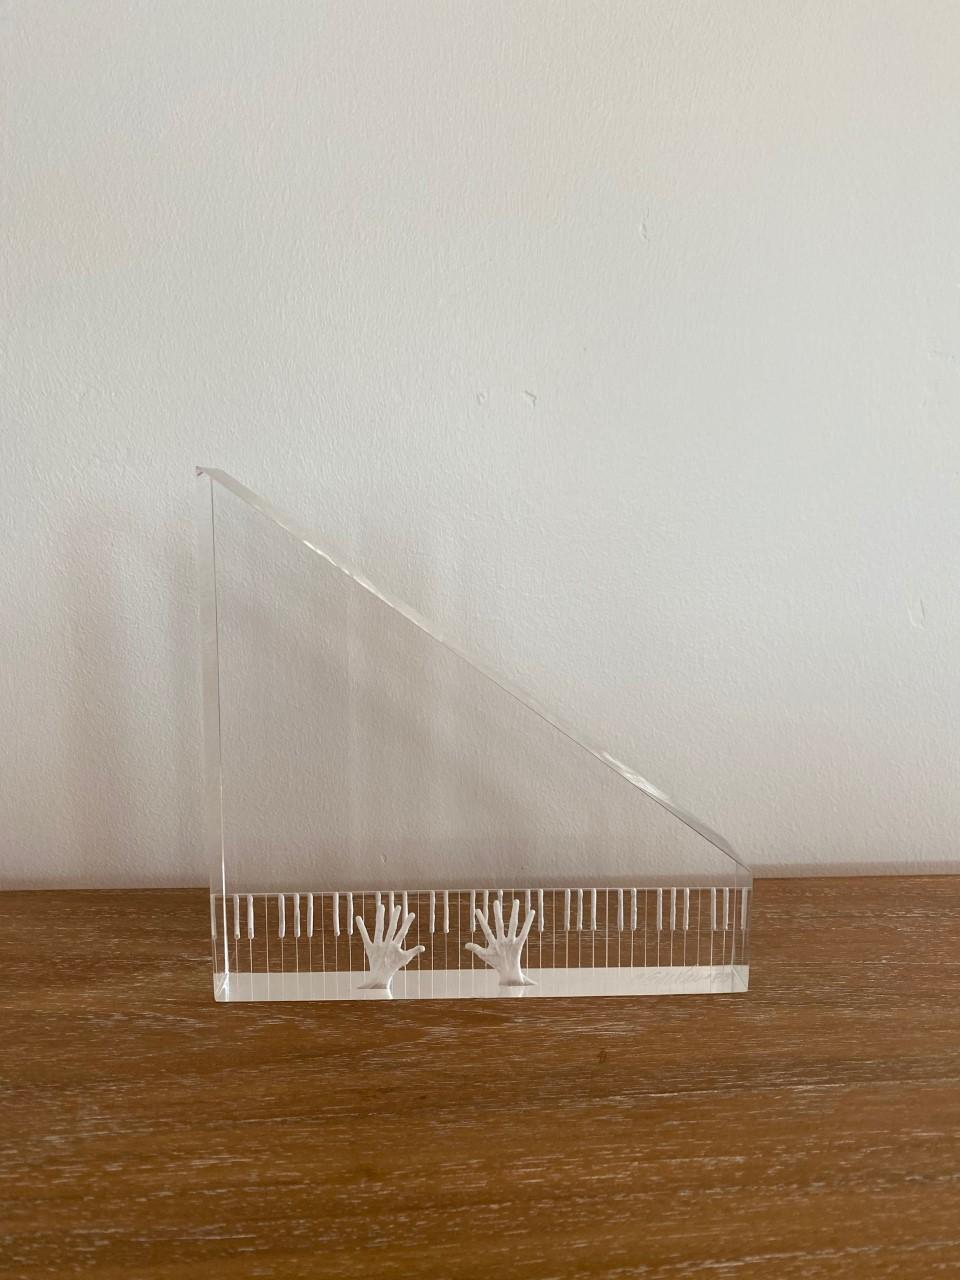 Lucite piano and hands sculpture, circa 1980s. Similar style to Eugene Brignola exquisite details.
Measures: 8” long, 8” tall, 1.5” wide signed by artist (Joseph Galvan).
     